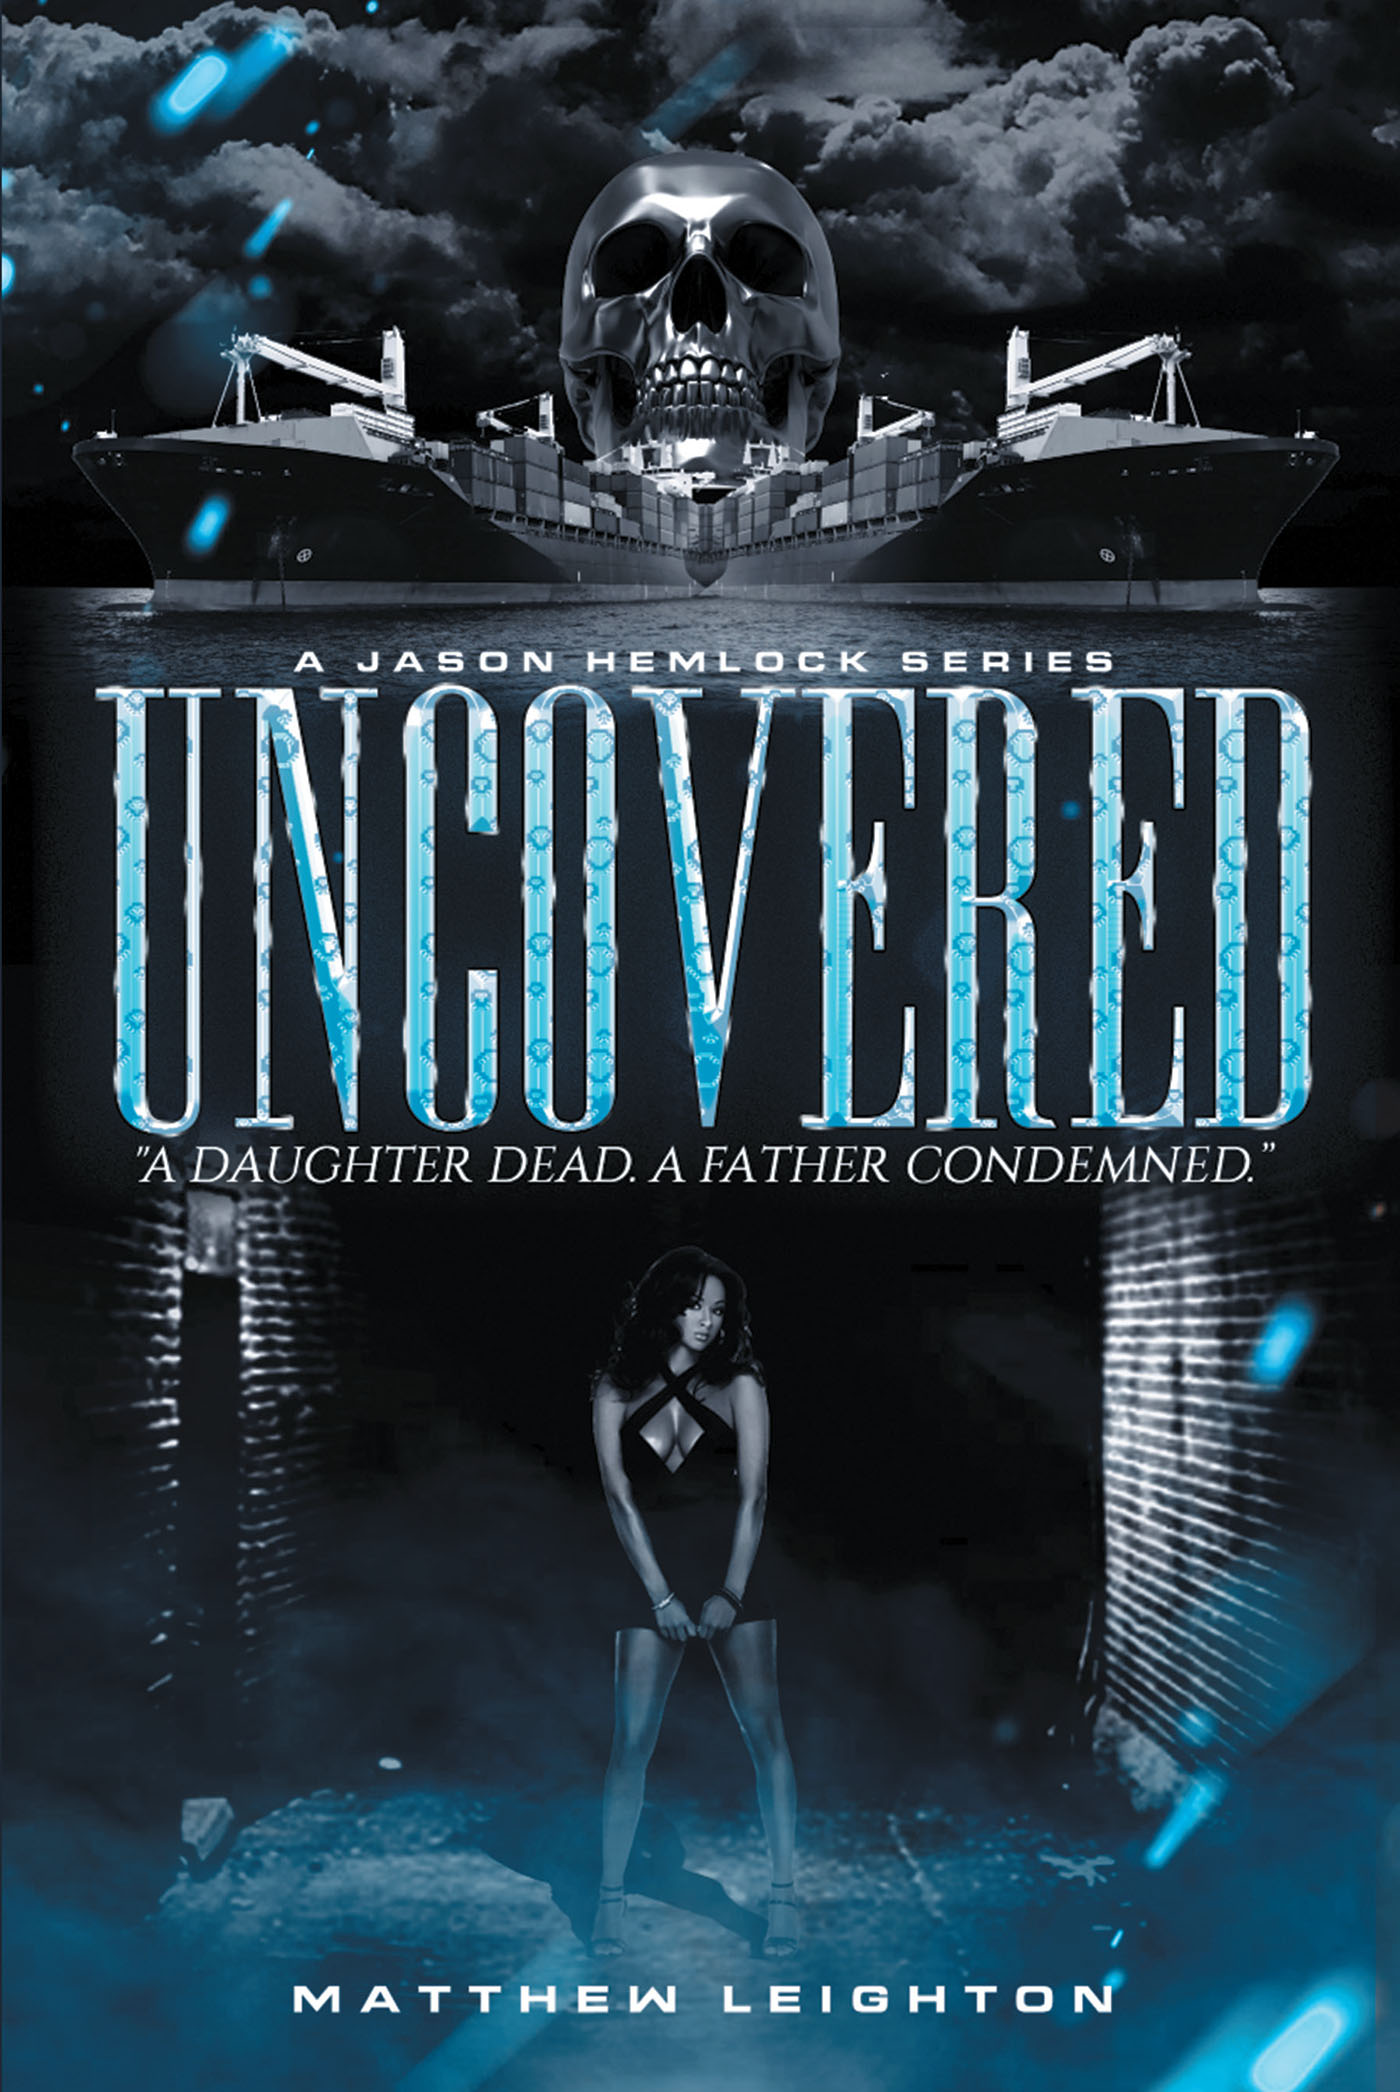 Author Matthew Leighton’s New Book, "UnCovered: A Daughter Dead, a Father Condemned," is a Thrilling Story About a Father’s Search to Solve His Daughter’s Murder